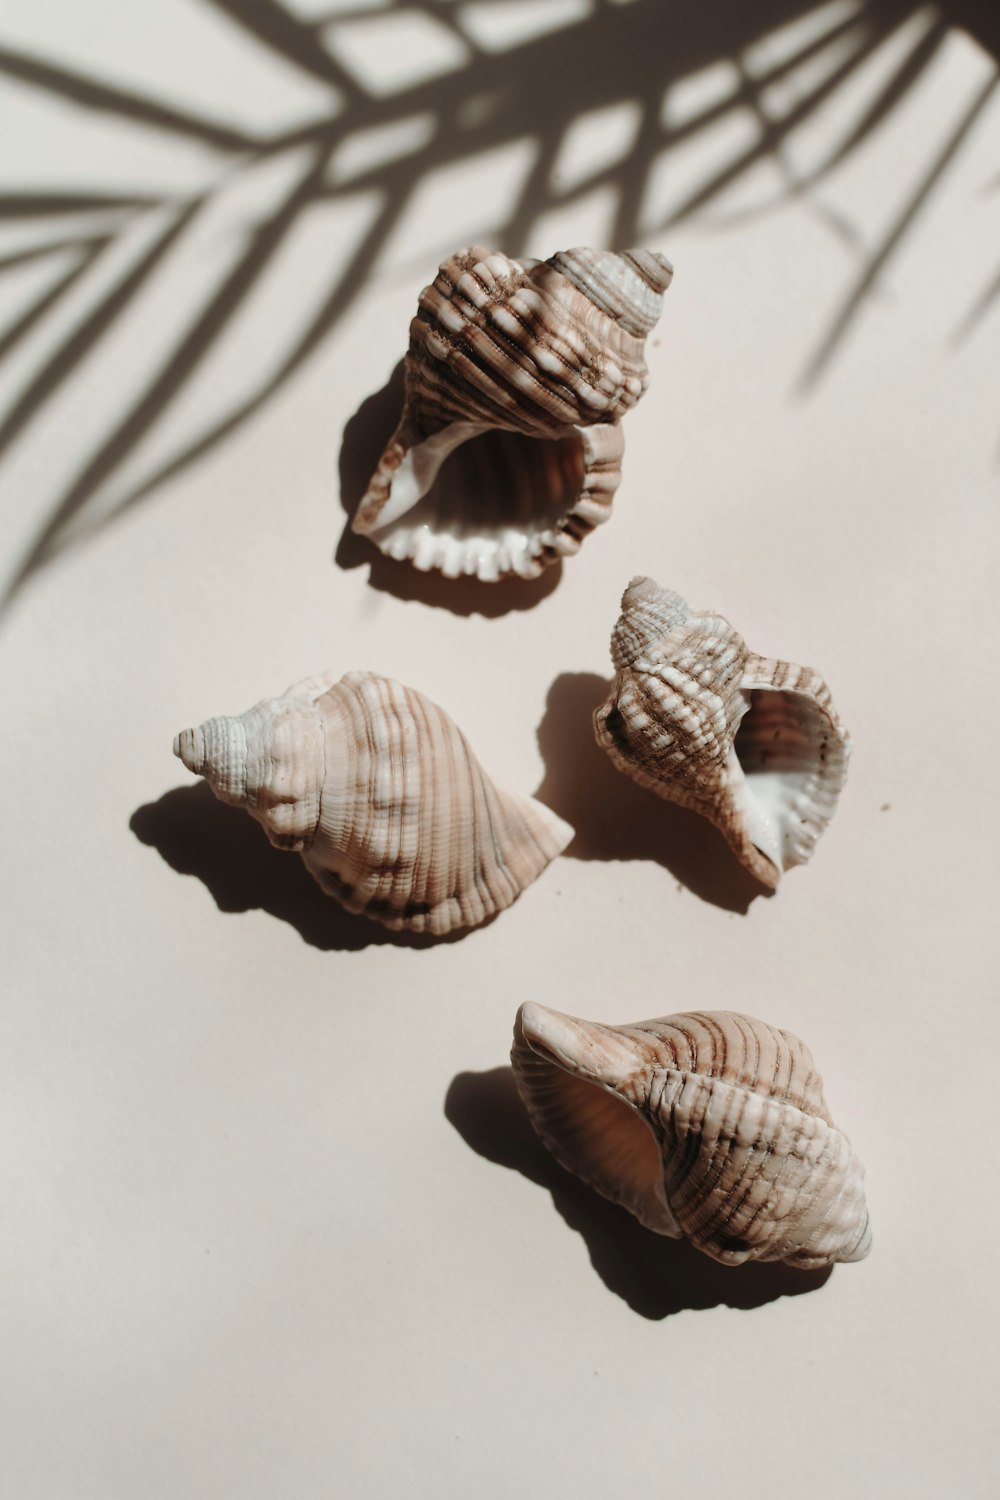 three seashells on a white surface with a shadow of a palm tree